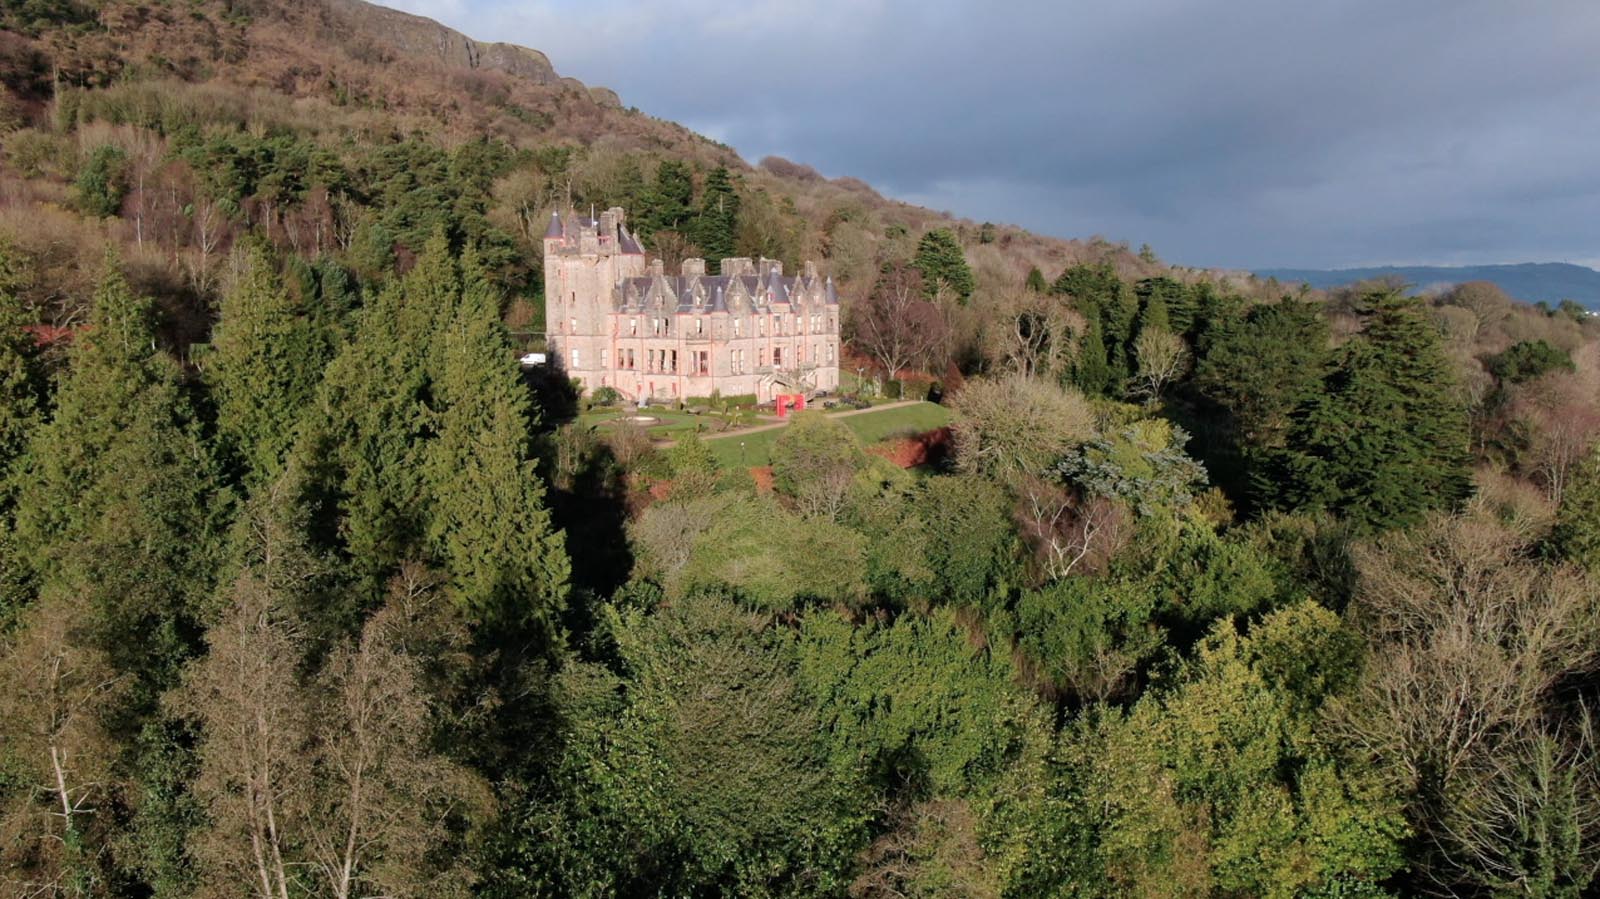 Aerial drone photography and video production services Dublin and Ireland portfolio - screenshot 1 of Belfast Castle 2 video